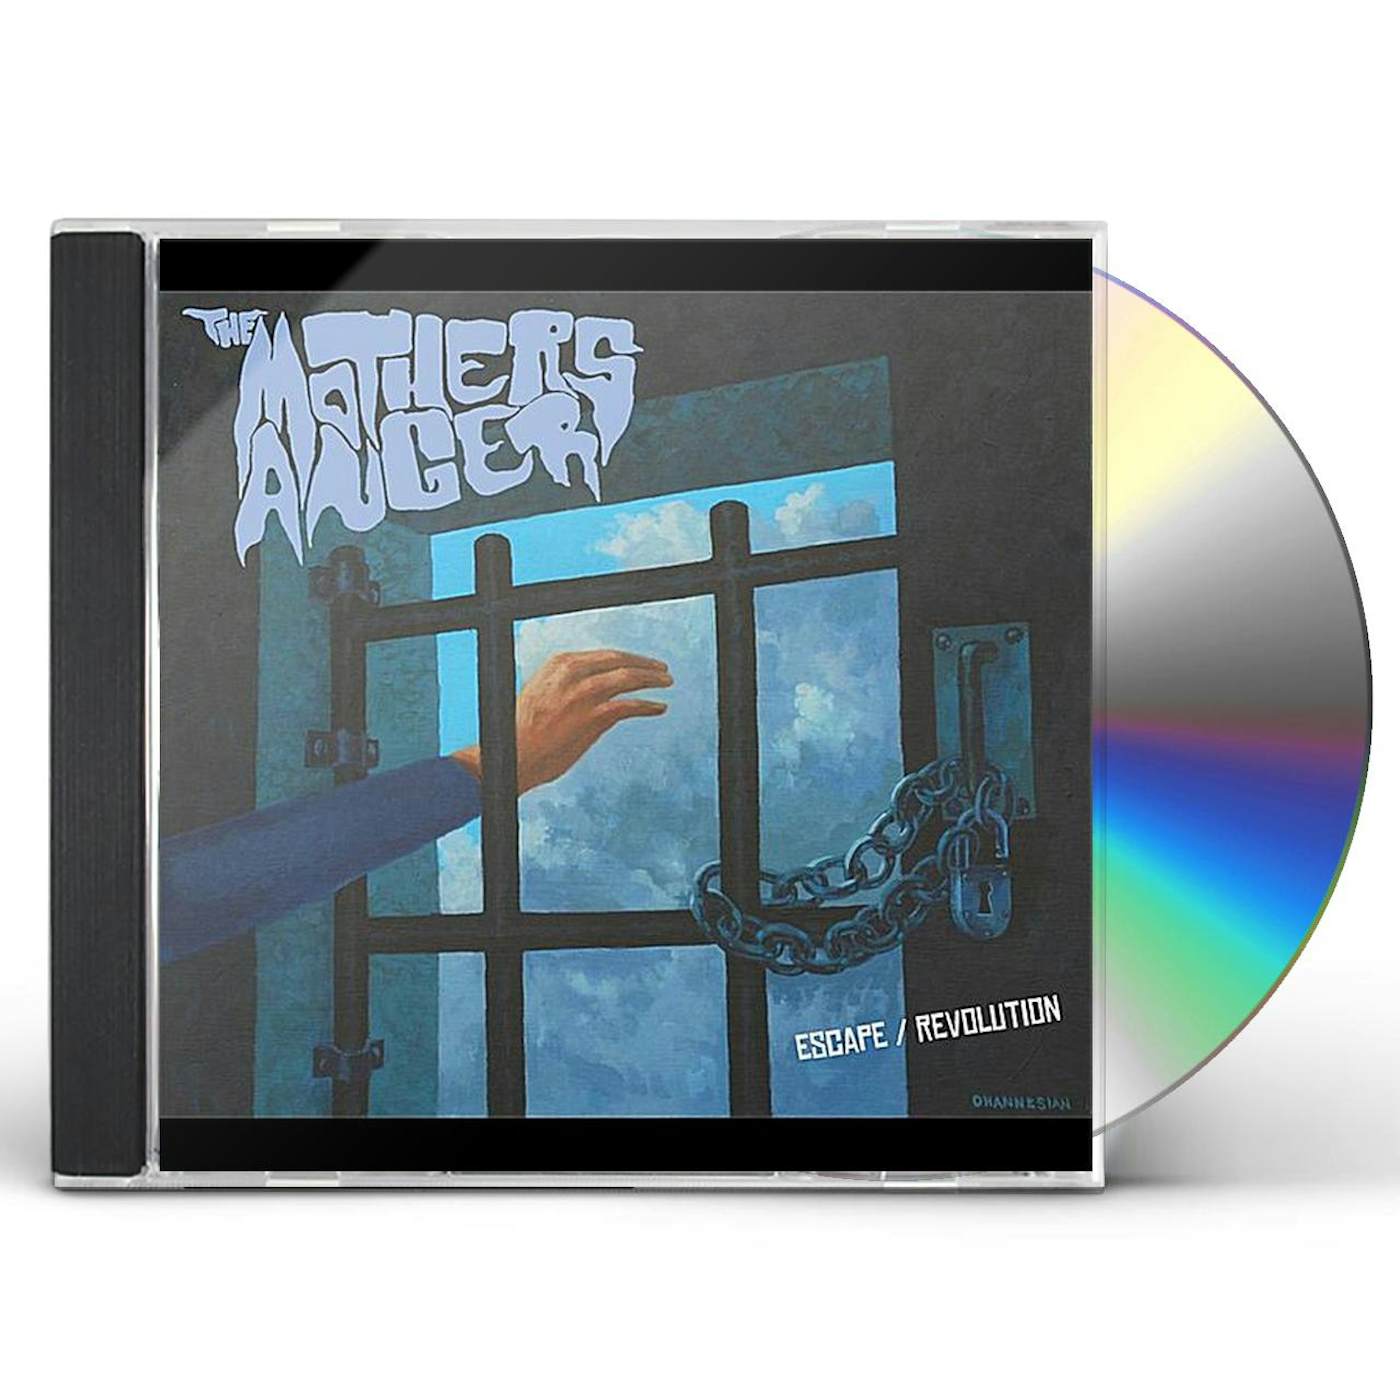 The Mothers Anger ESCAPE/REVOLUTION CD